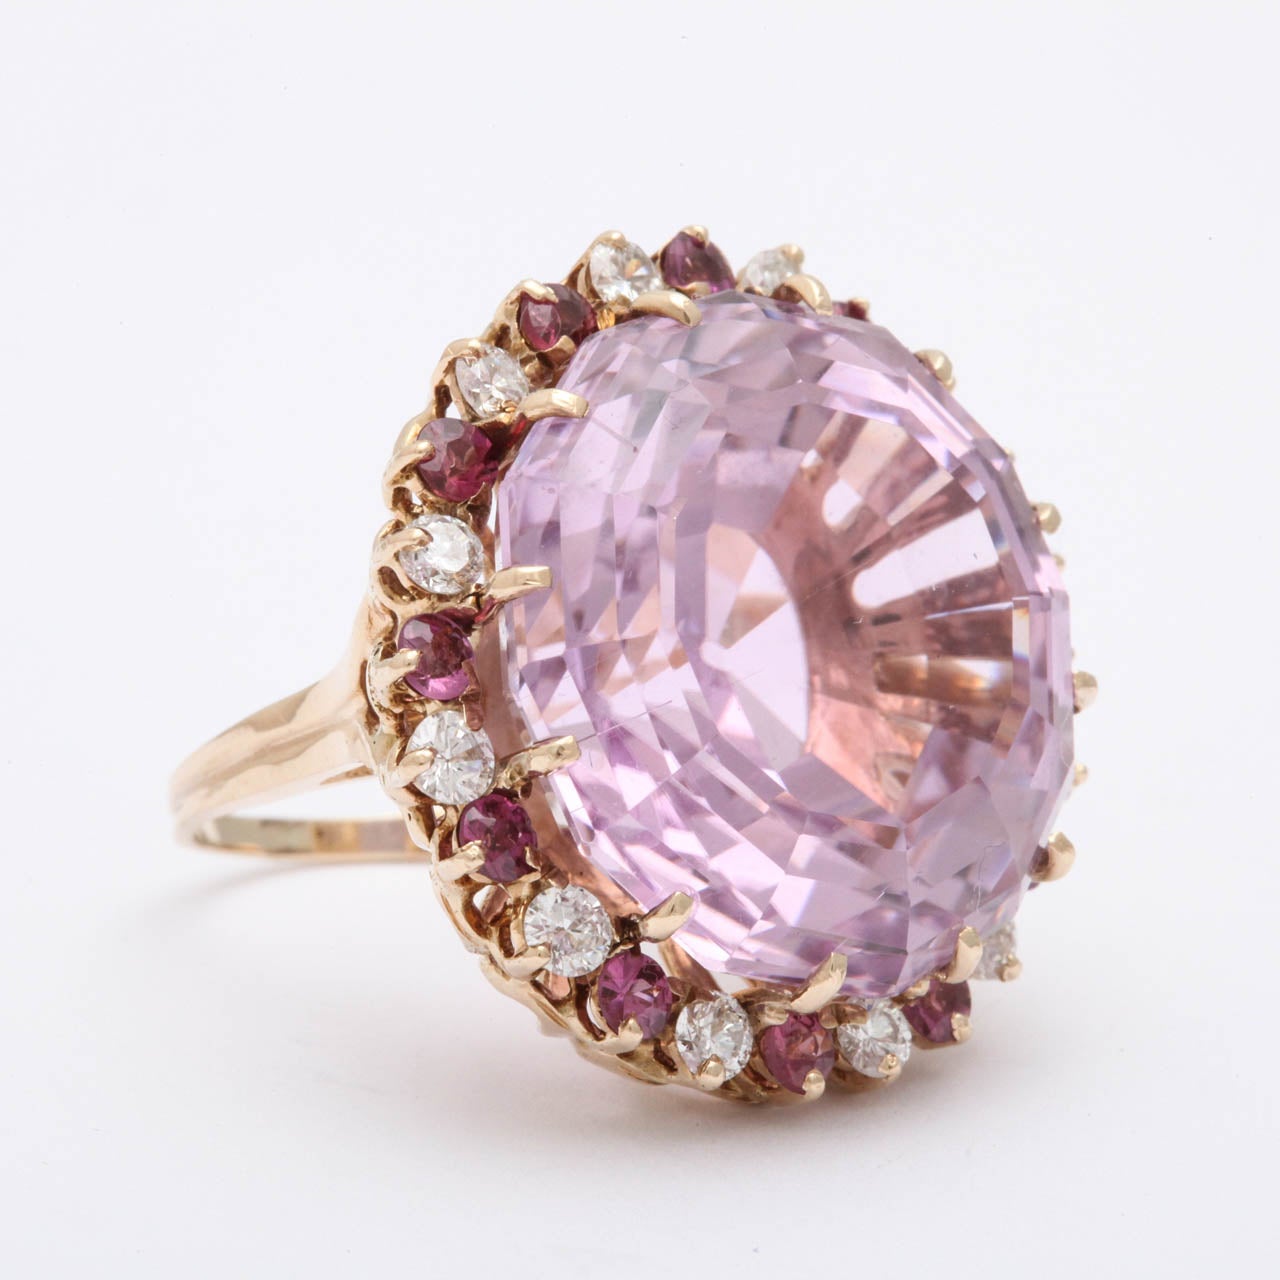 40 Carat Pink Kunzite Cocktail Ring Surrounded by Numerous Diamonds And Pink Tourmalines setting in 18kt yellow gold ring size 6 may be sized to any size you require